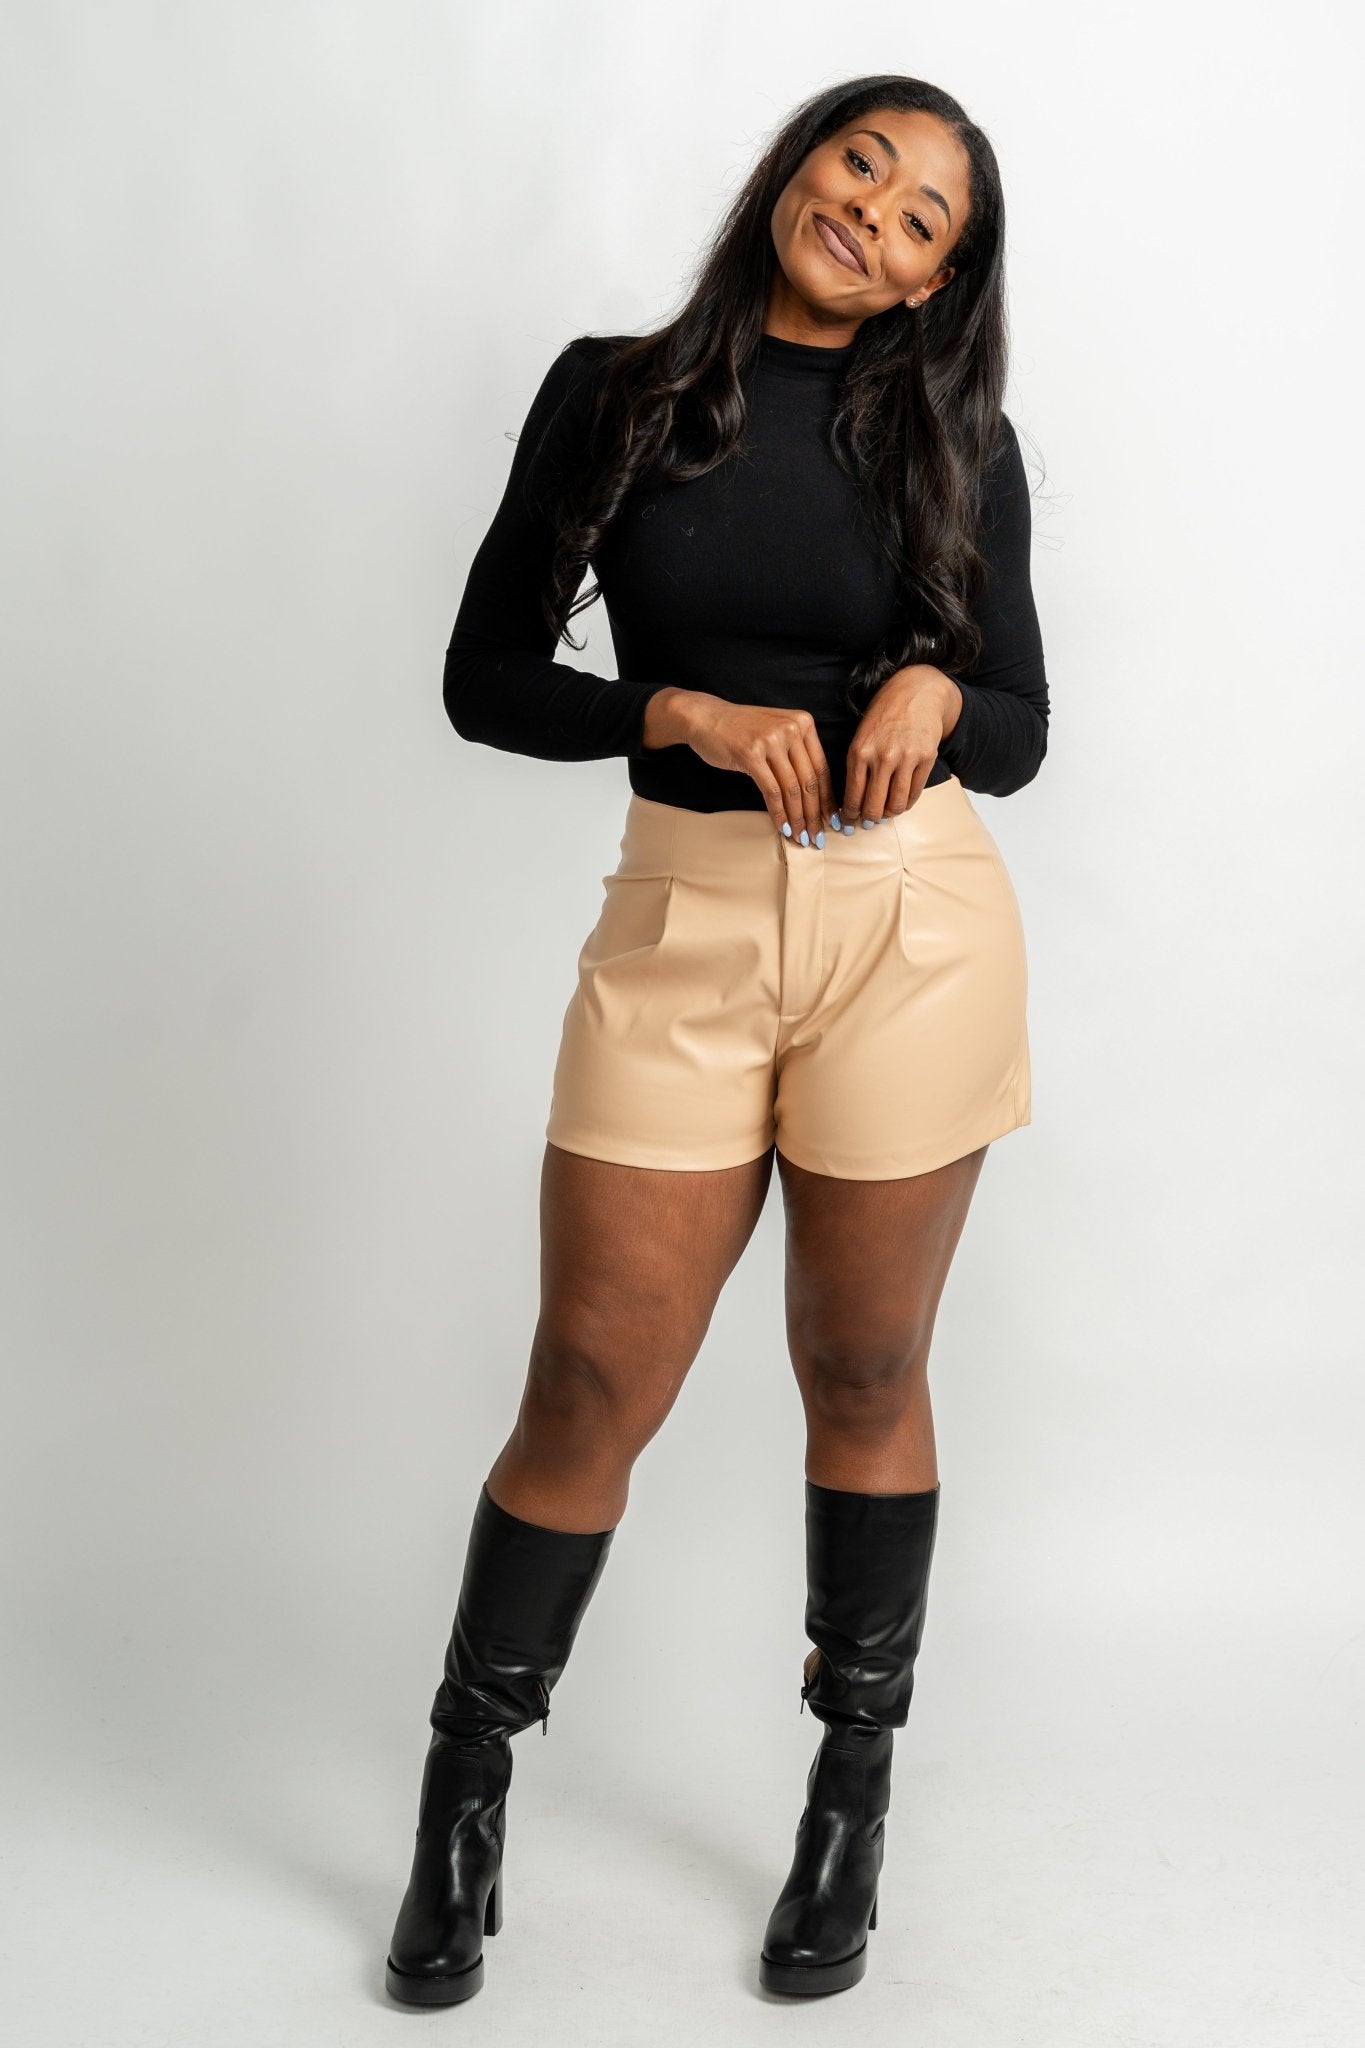 Faux leather shorts tan - Affordable shorts - Boutique Shorts at Lush Fashion Lounge Boutique in Oklahoma City